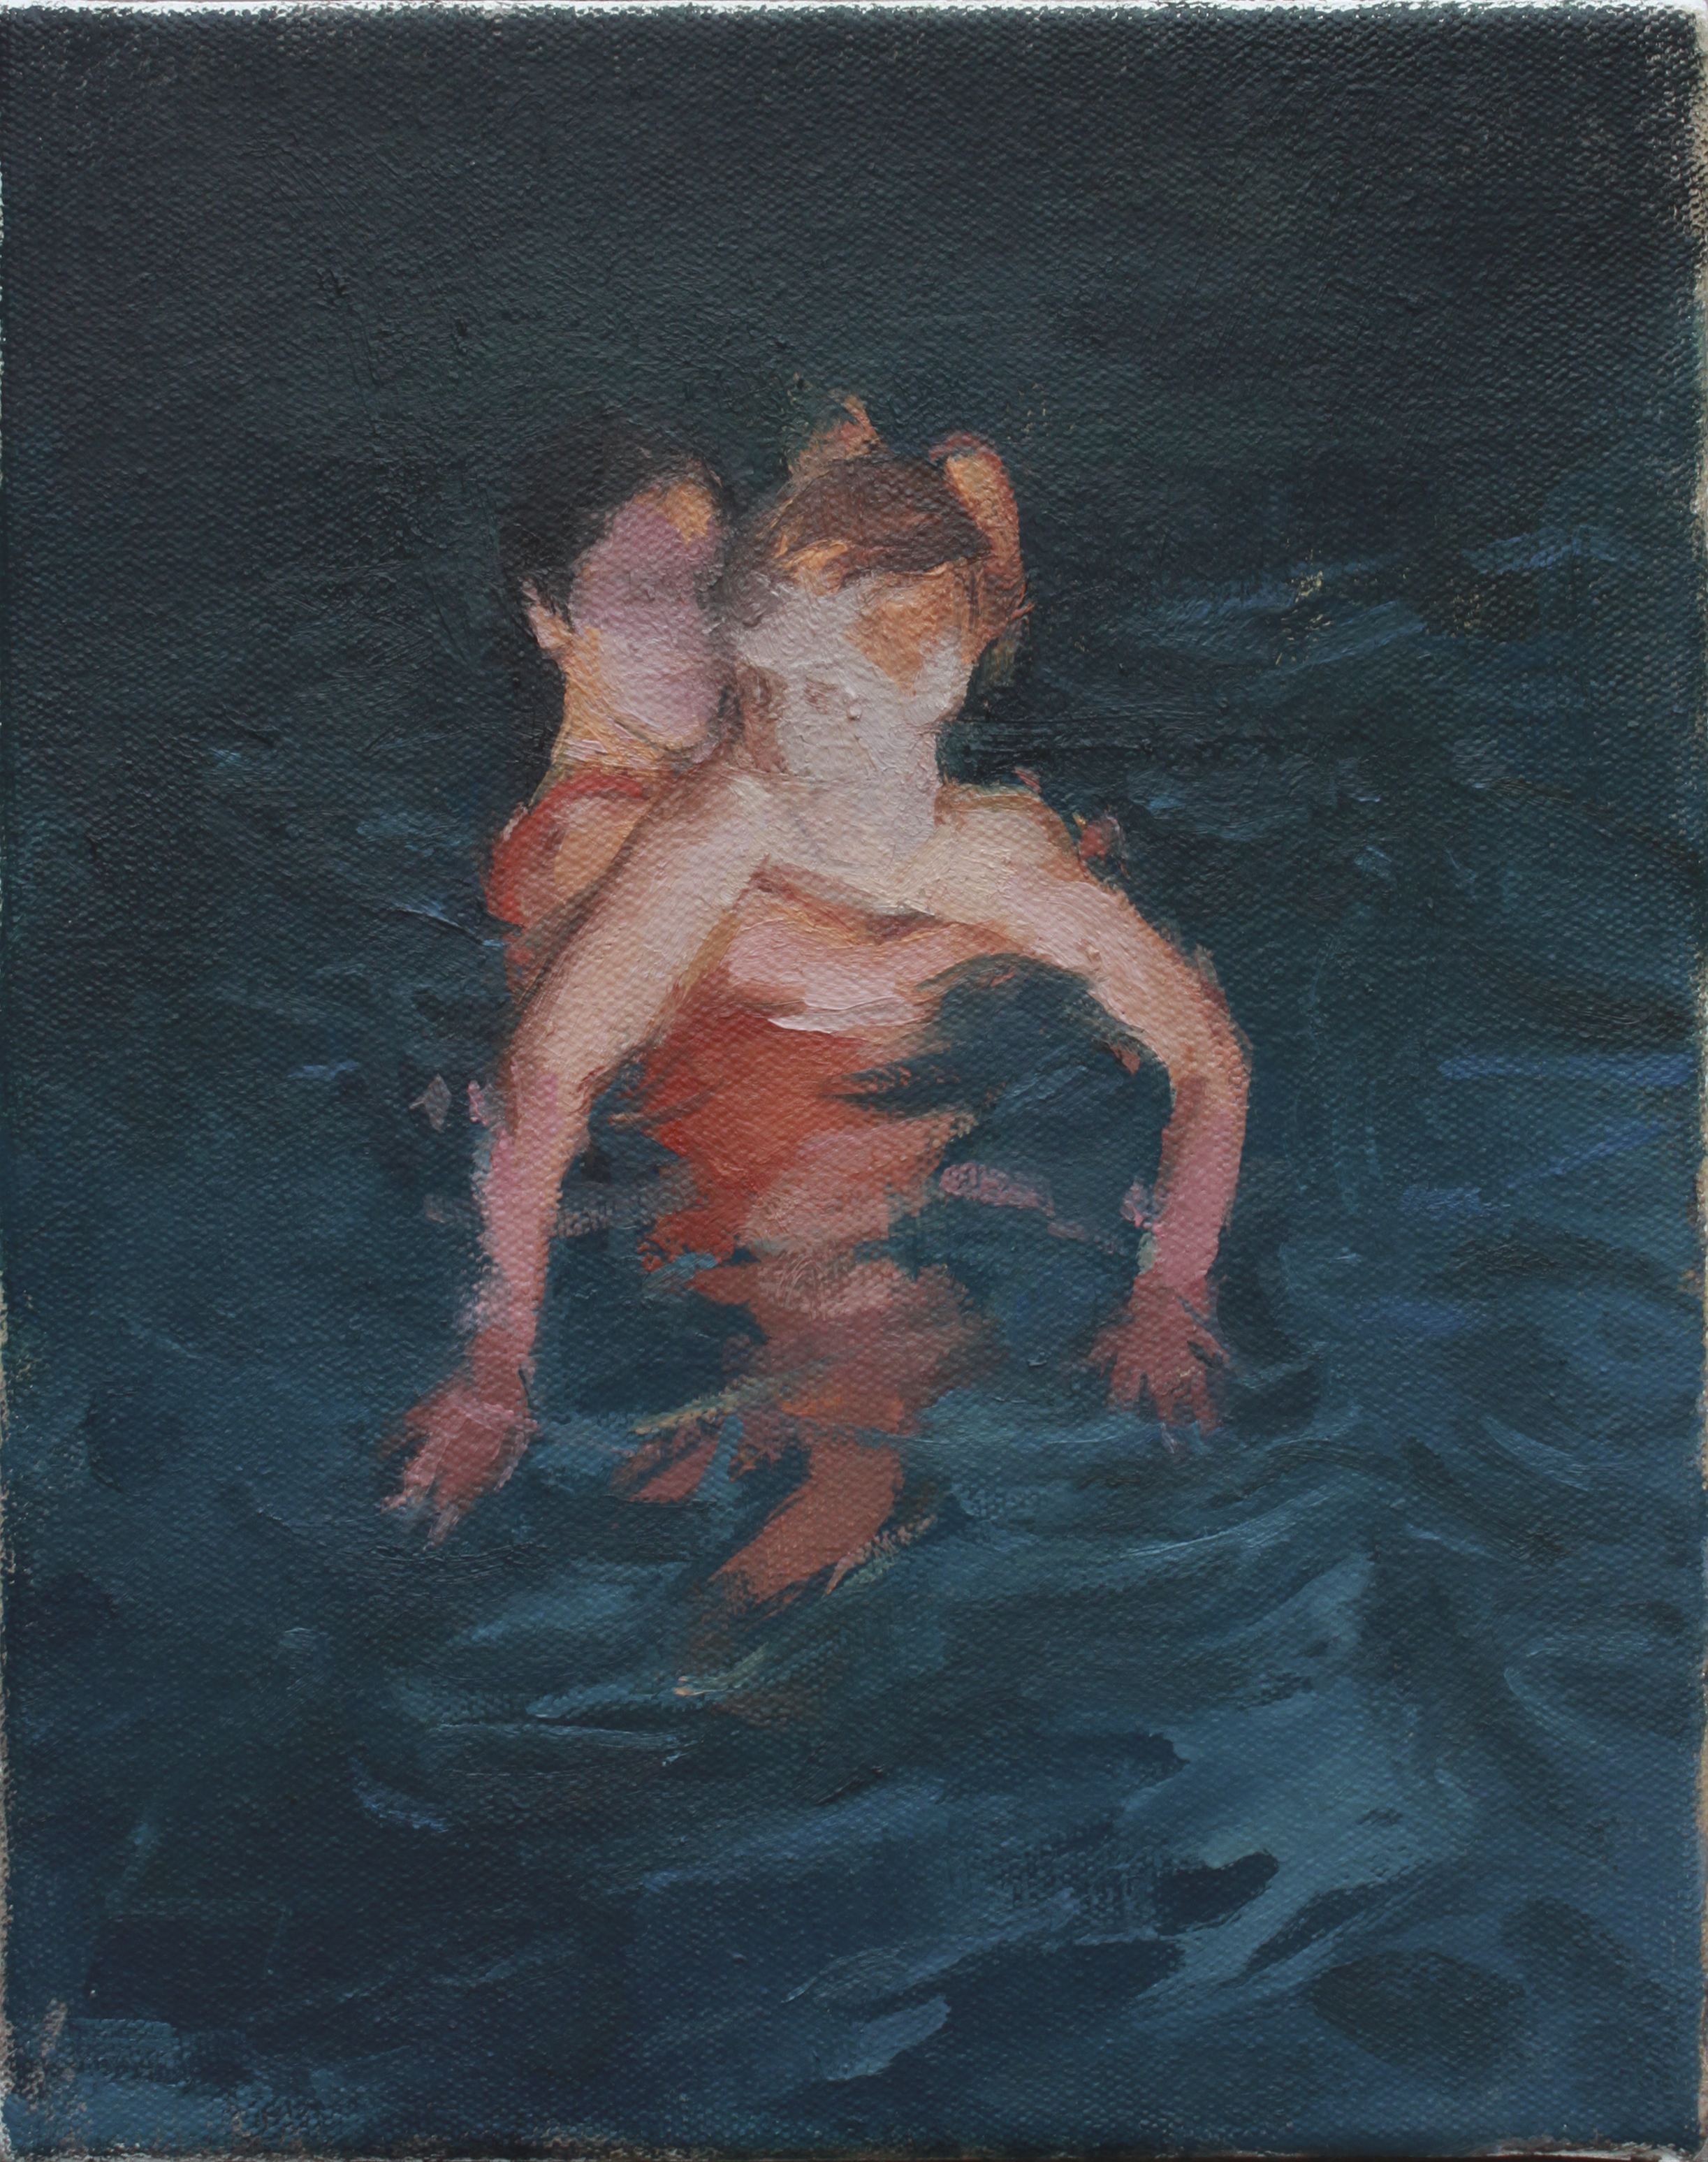    swimmers     oil on canvas 8x10" 2013  private collection NYC  purchase prints  